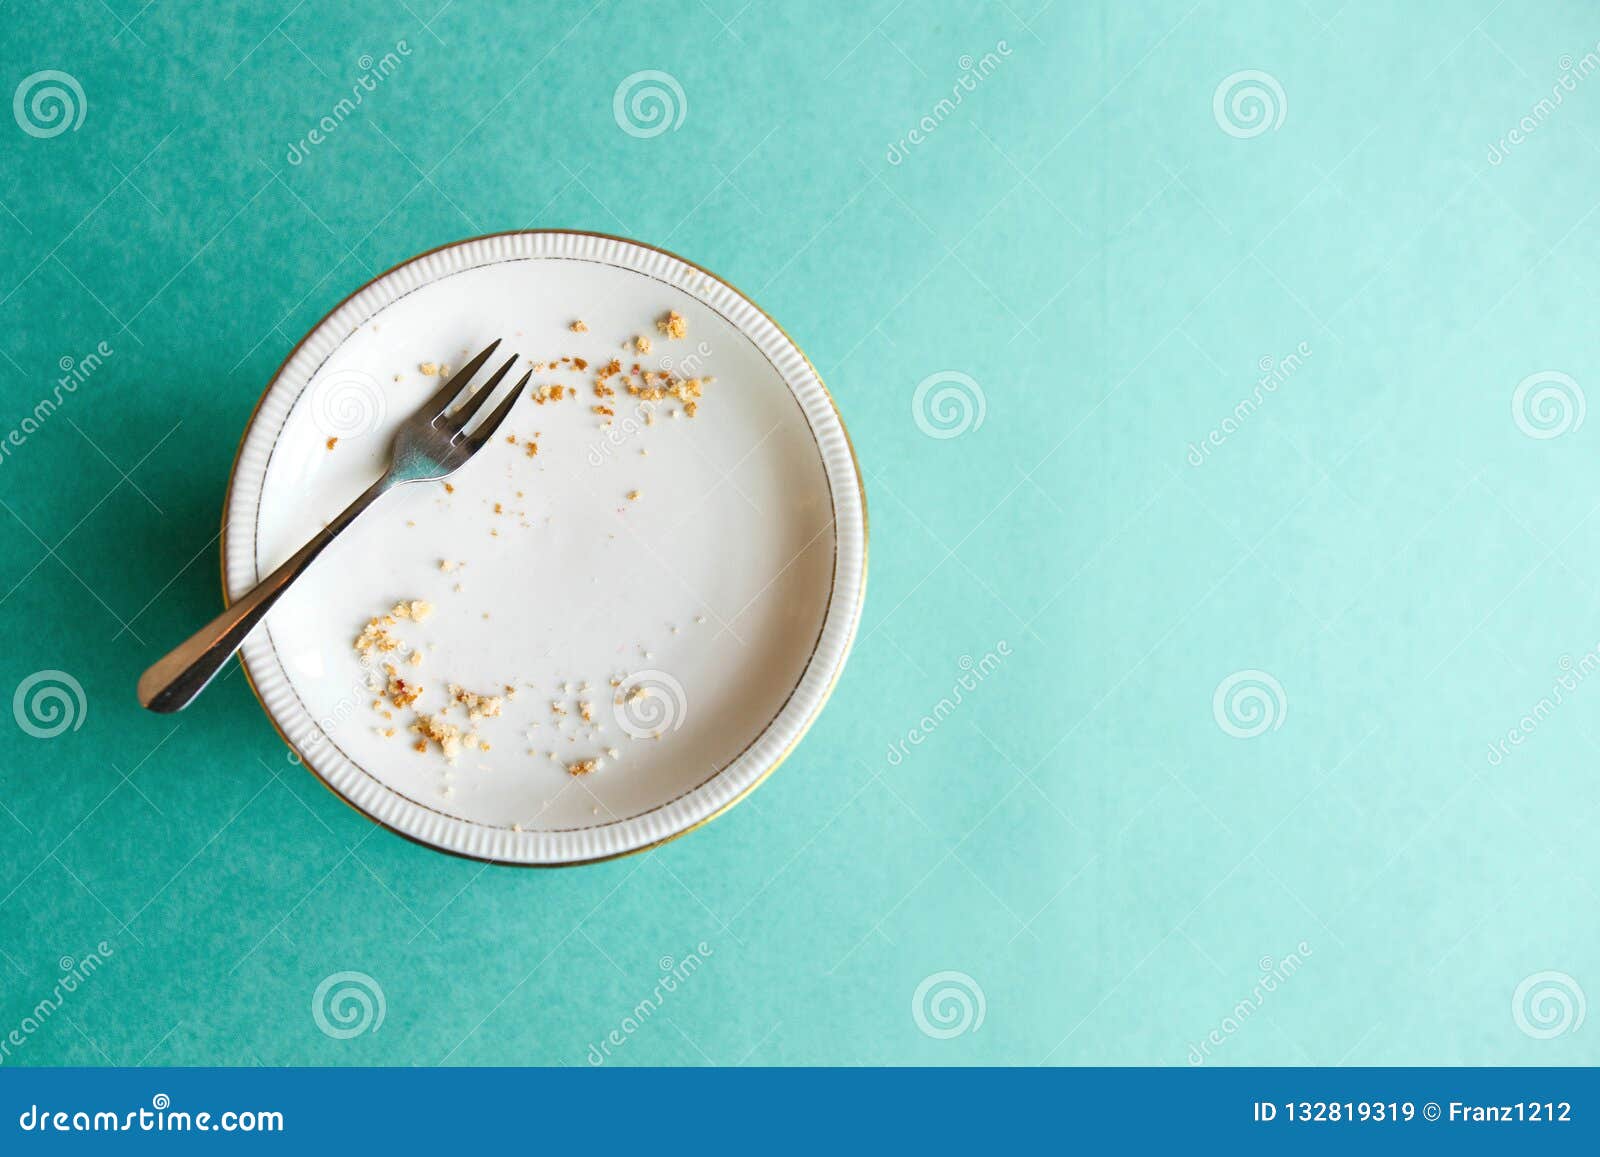 empty plate with crumbs after eating on a green background. the concept of the end of the holiday or celebration. nearby